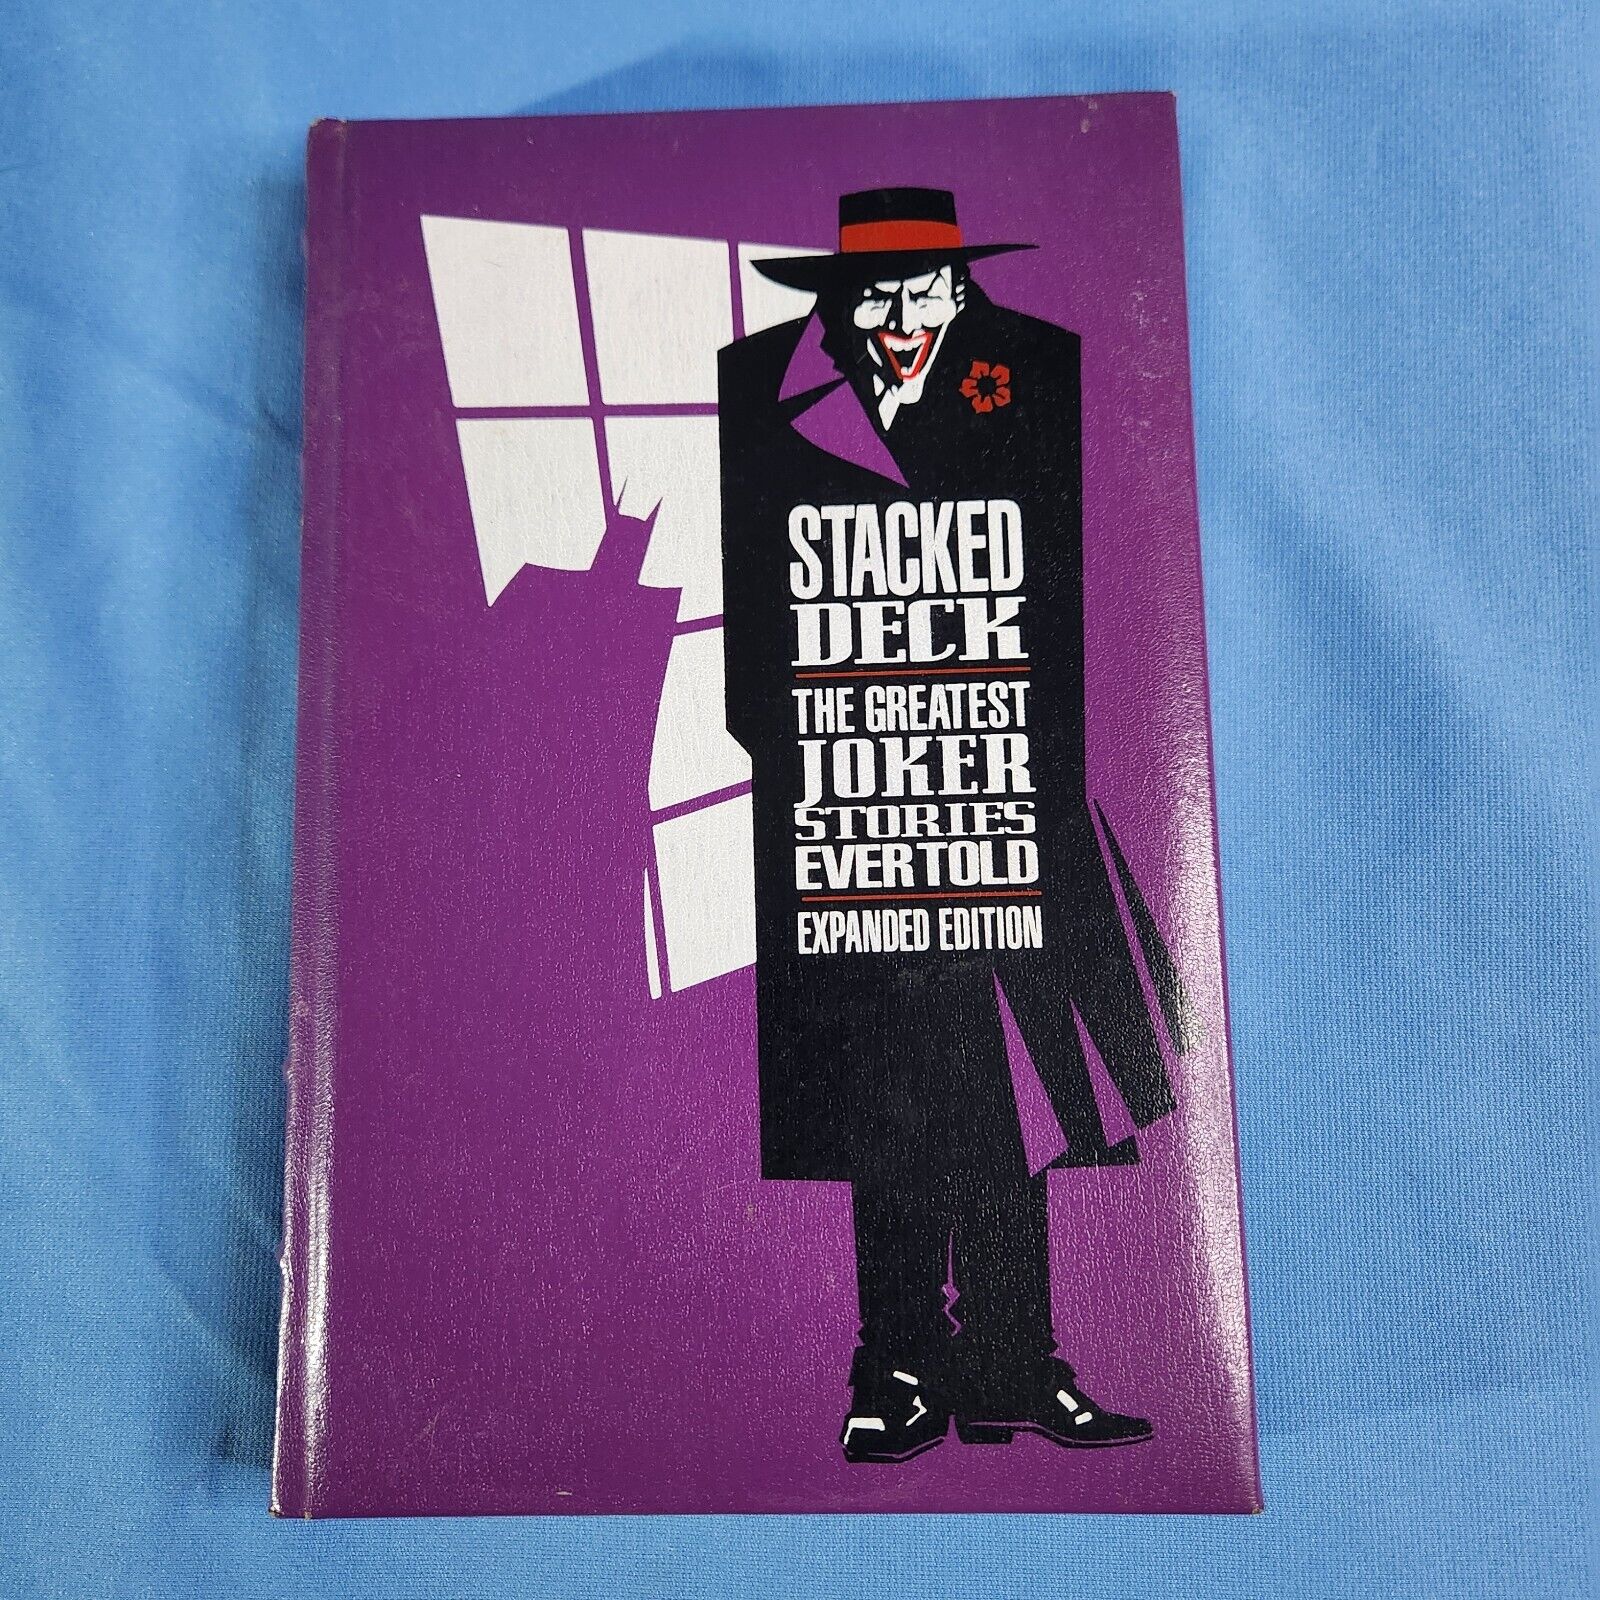 Stacked Deck: The Greatest Joker Stories Ever Told Expanded Harback Book